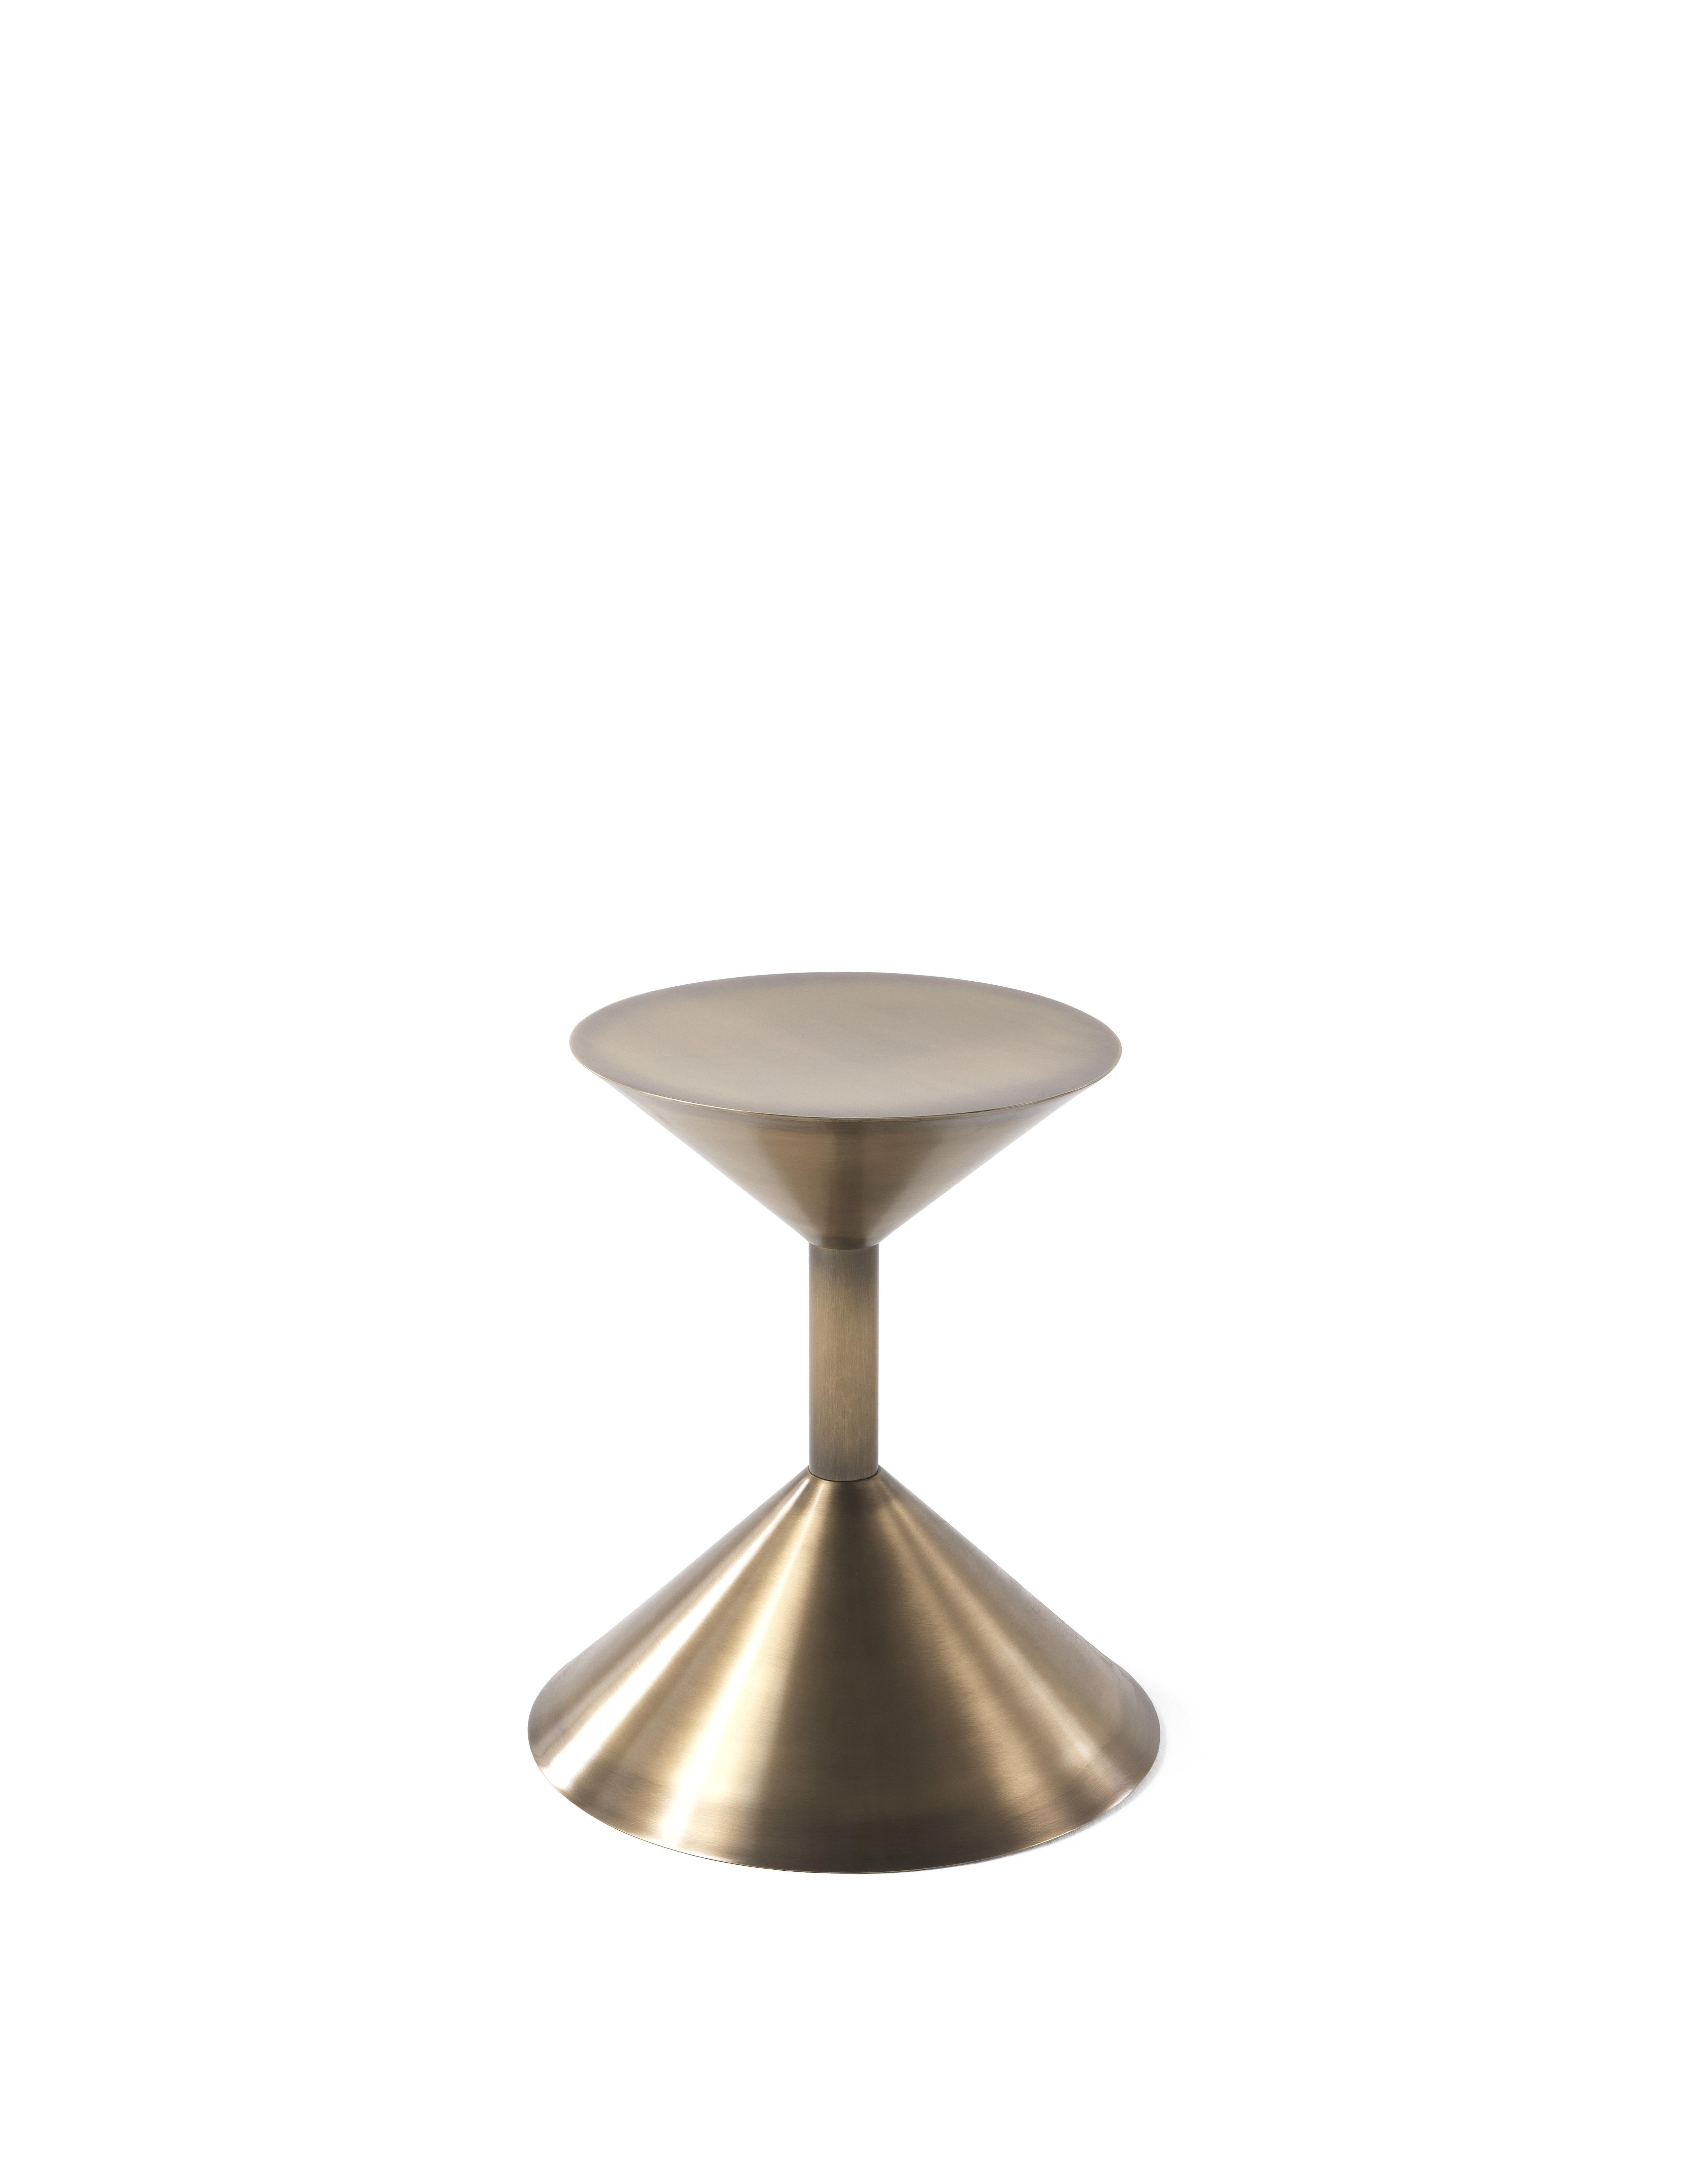 The Sand Side Table with structure in metal with Brushed Bronze finishing.